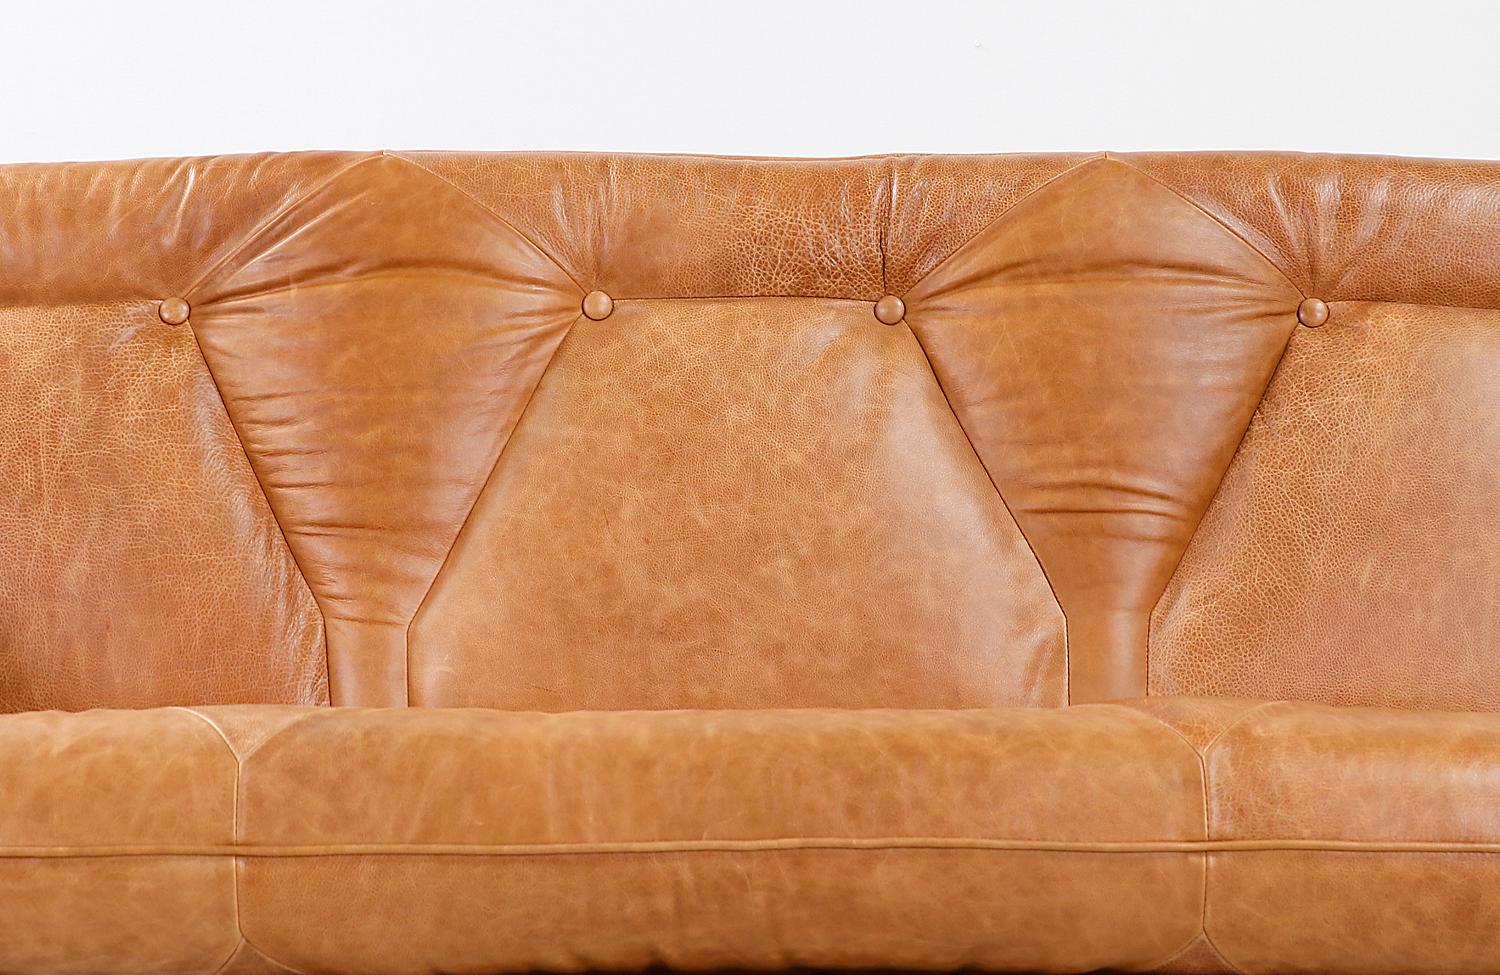 Mid-Century Modern Expertly Restored - Jorge Zalszupin “Presidencial” Rosewood Sofa for L’Atelier